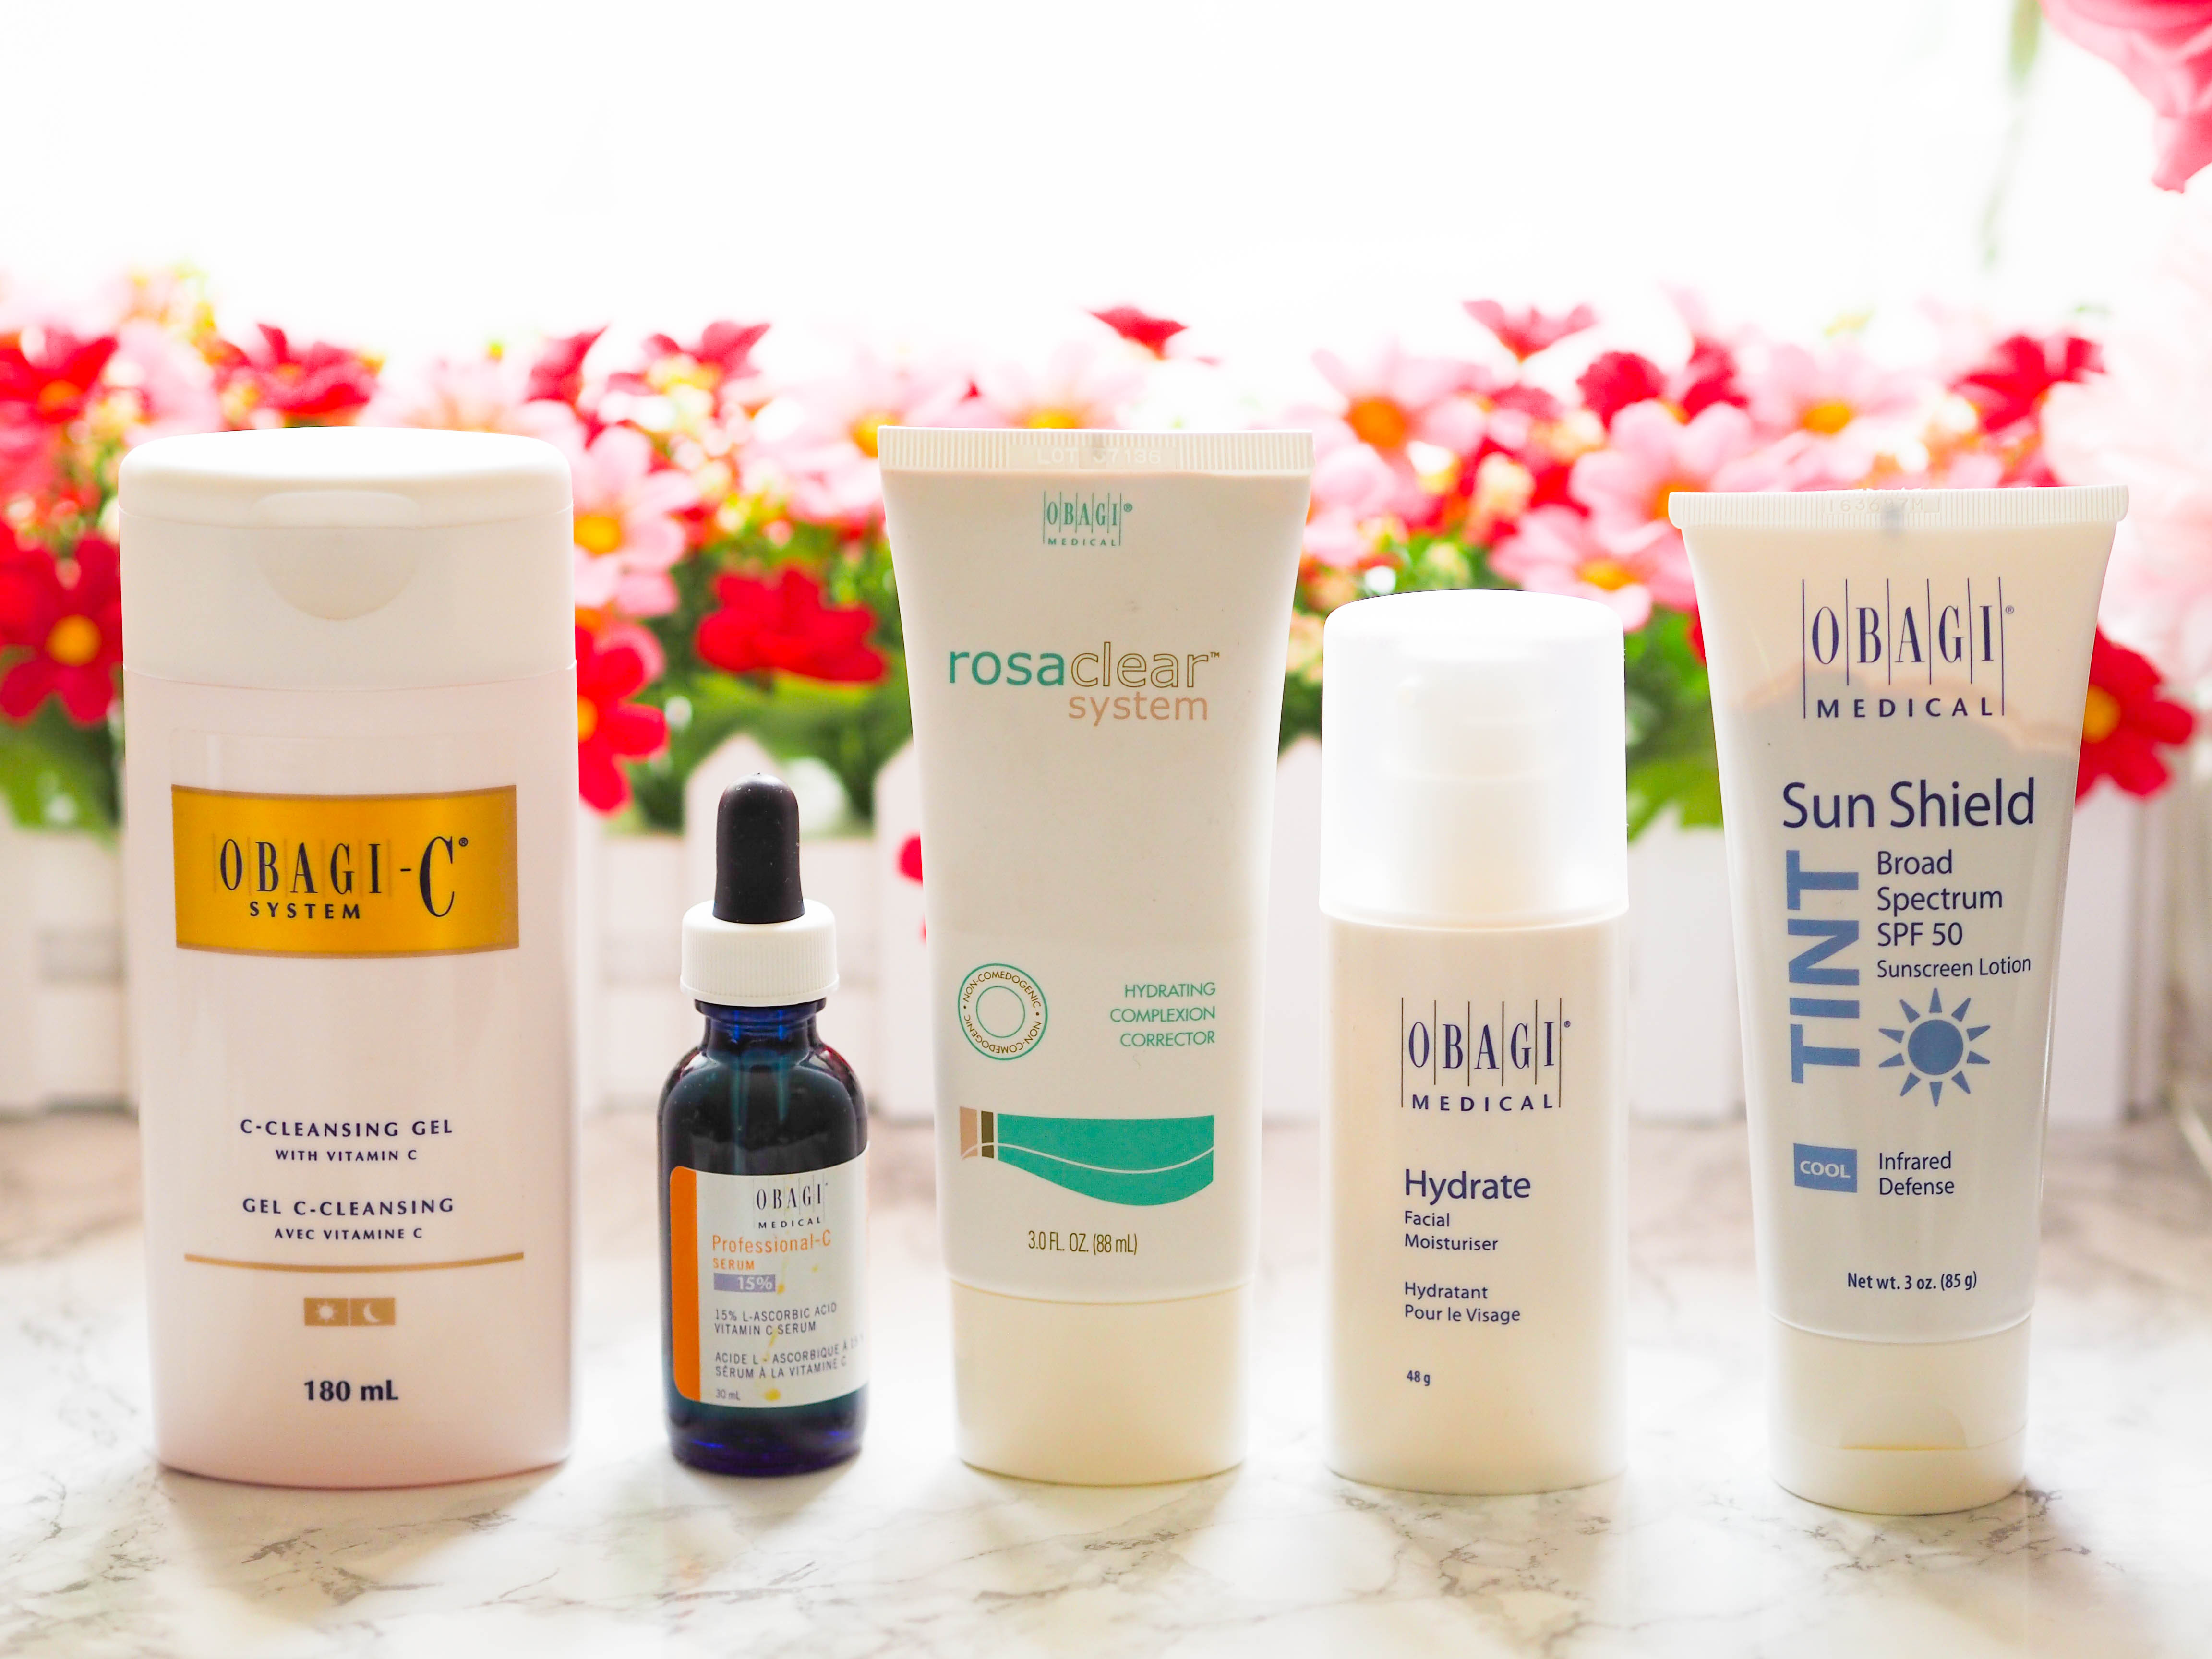 Obagi-C Rx Skincare System Initial Review - Beauty Geek UK